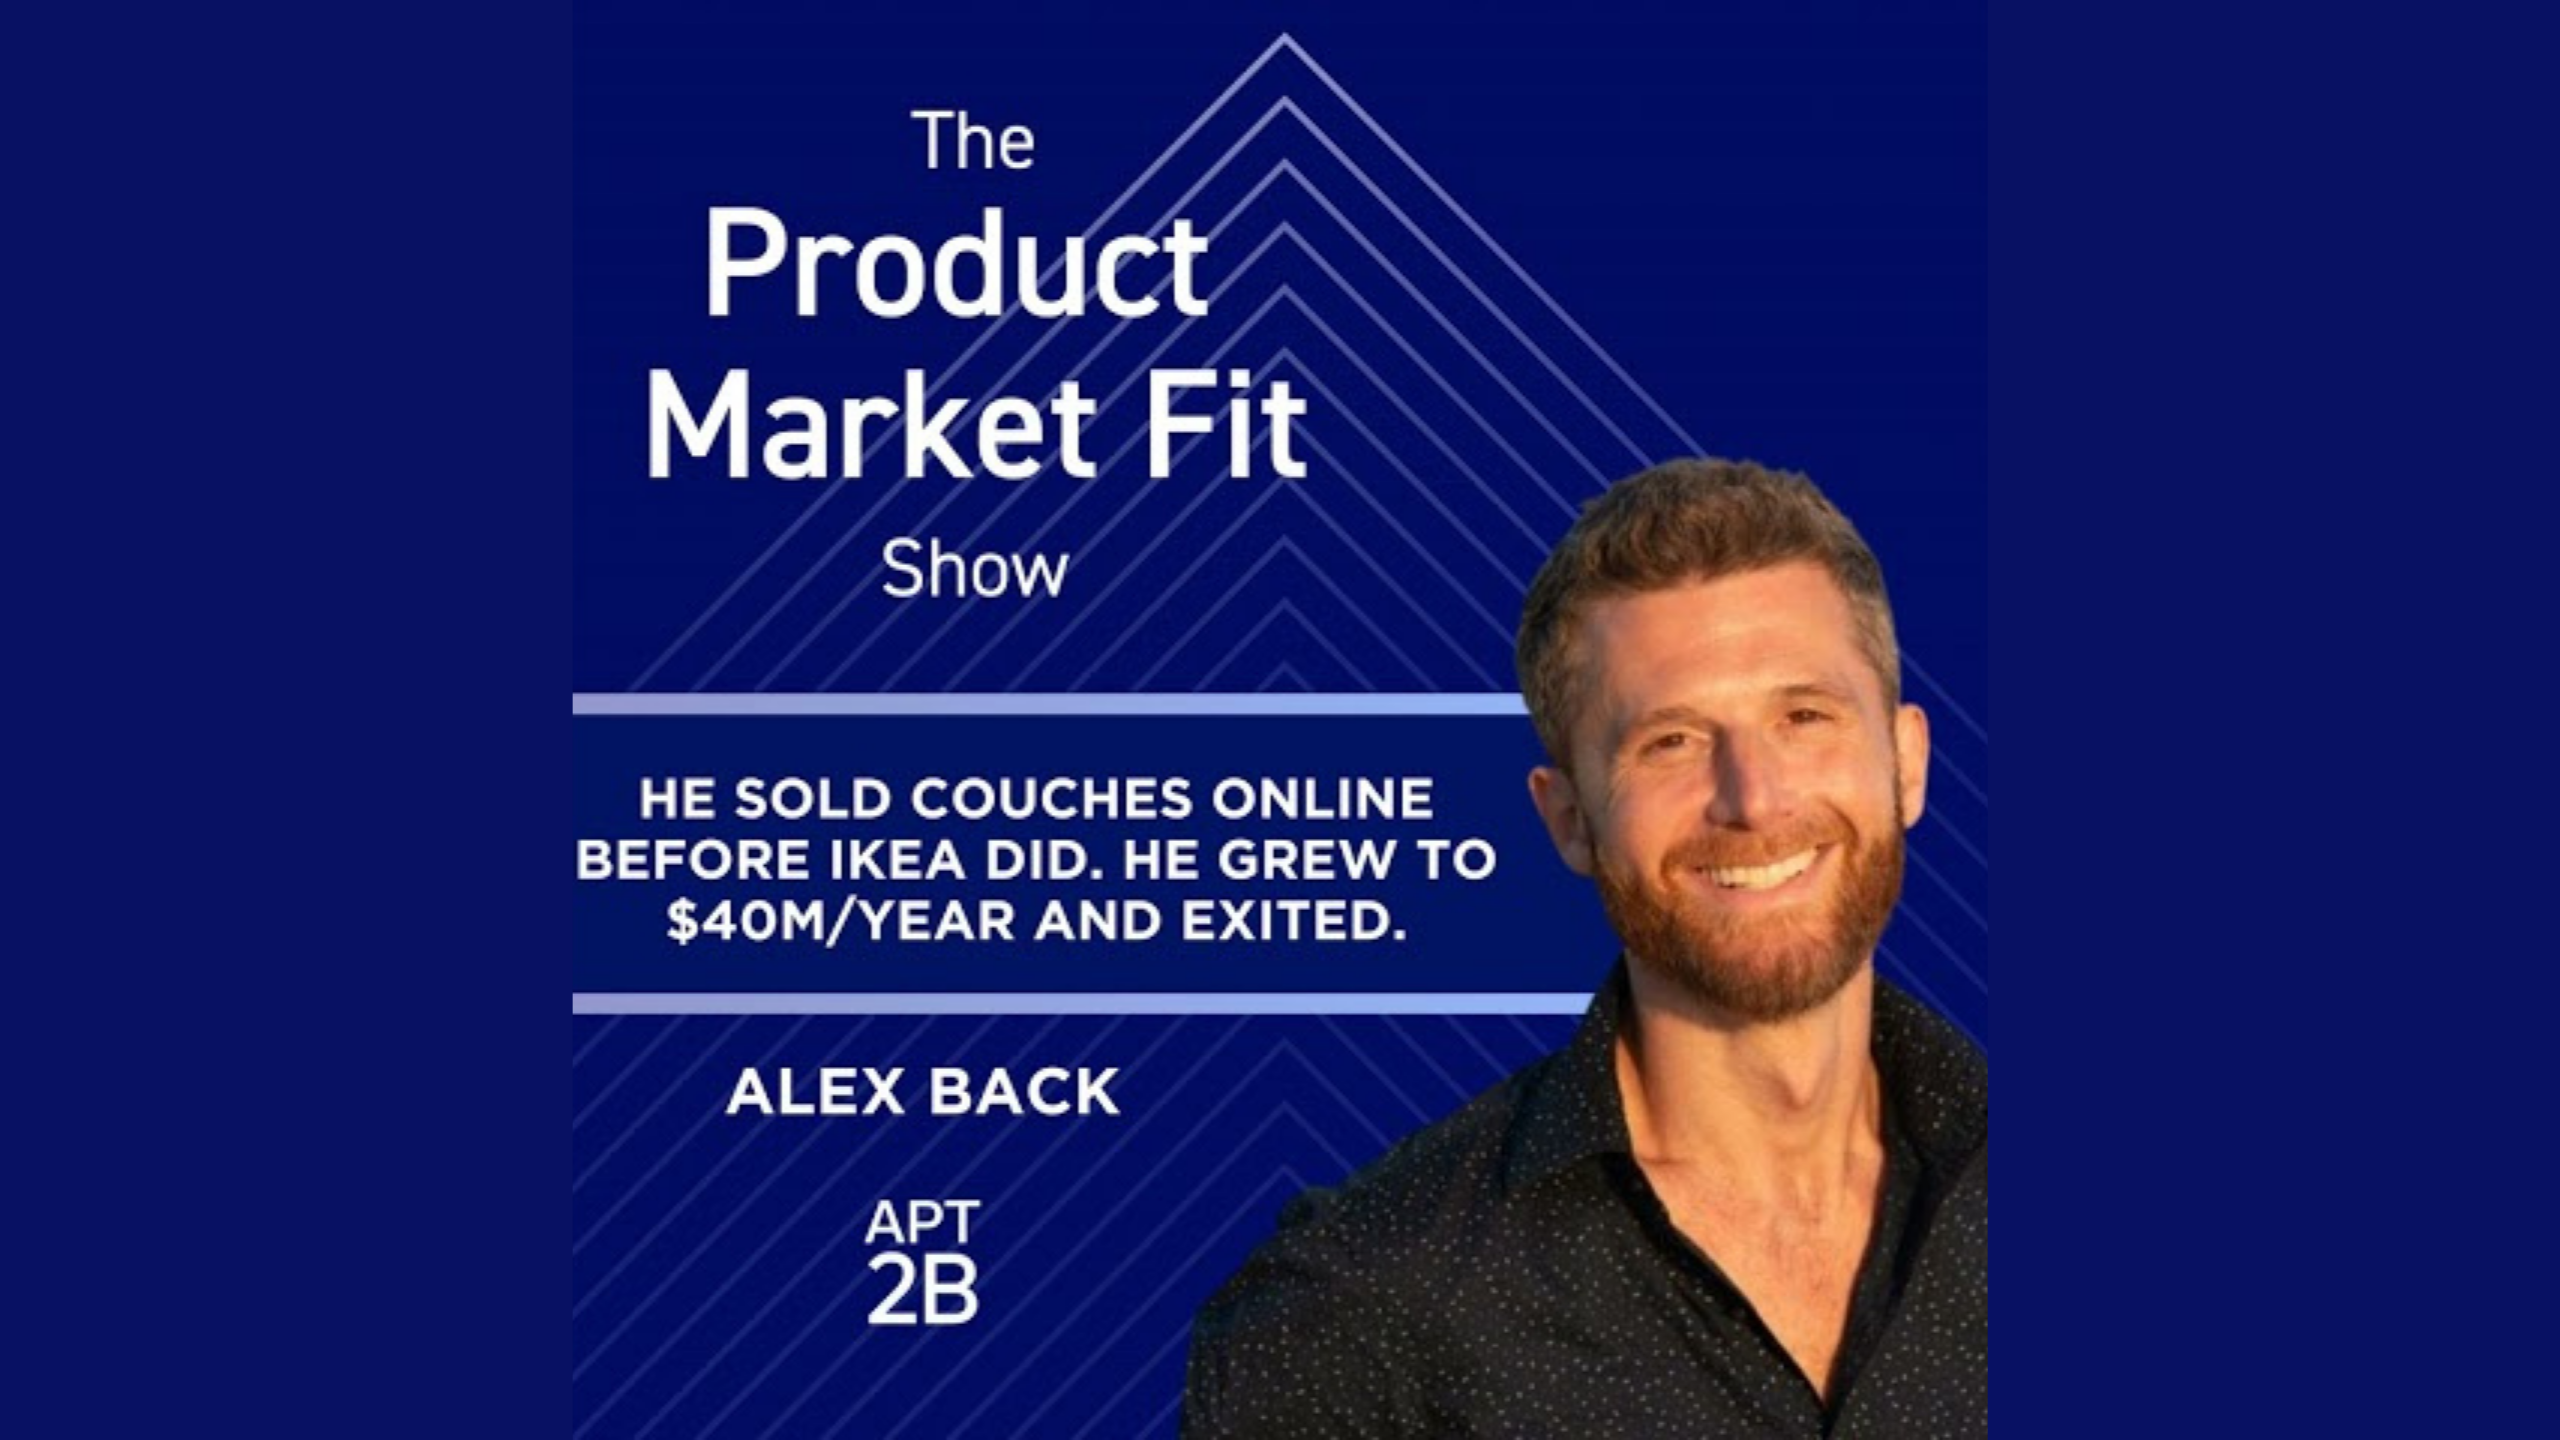 Image of a podcast promotion for "The Product Market Fit Show." The background features blue geometric patterns. Text on the image reads, "He sold couches online before IKEA did. He grew to $40M/year and exited." A smiling man identified as Alex Back is shown. The footer includes "APT 2B.